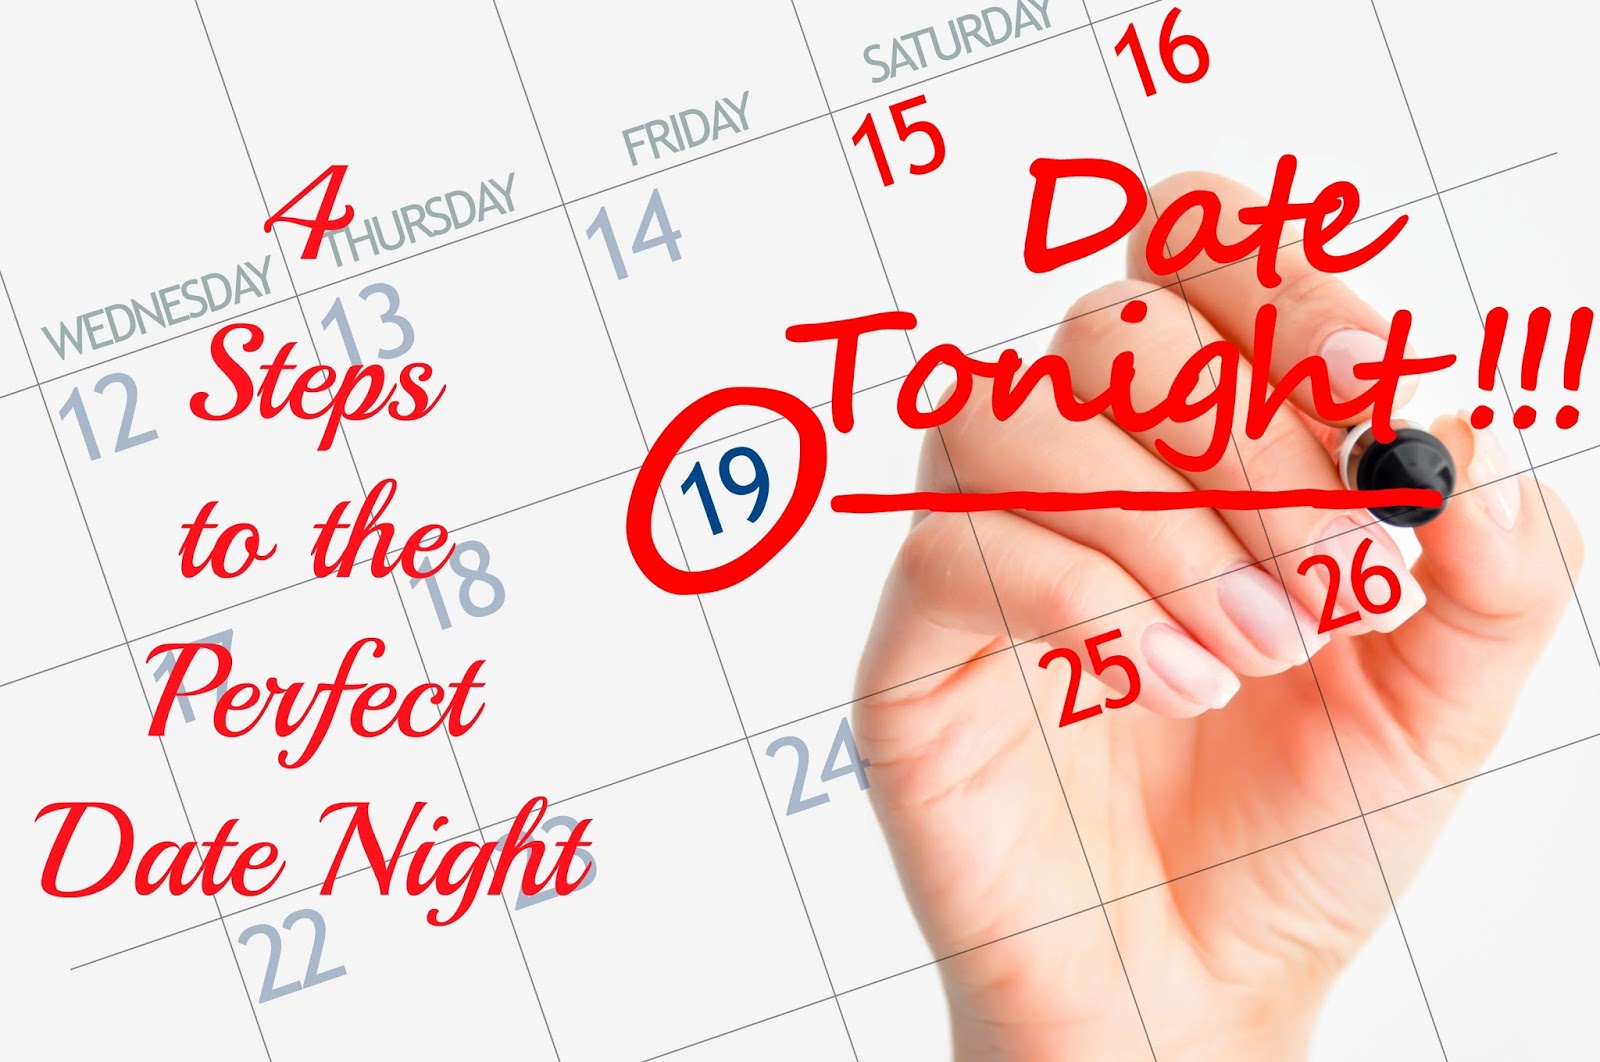 How To Have The Perfect Date Night